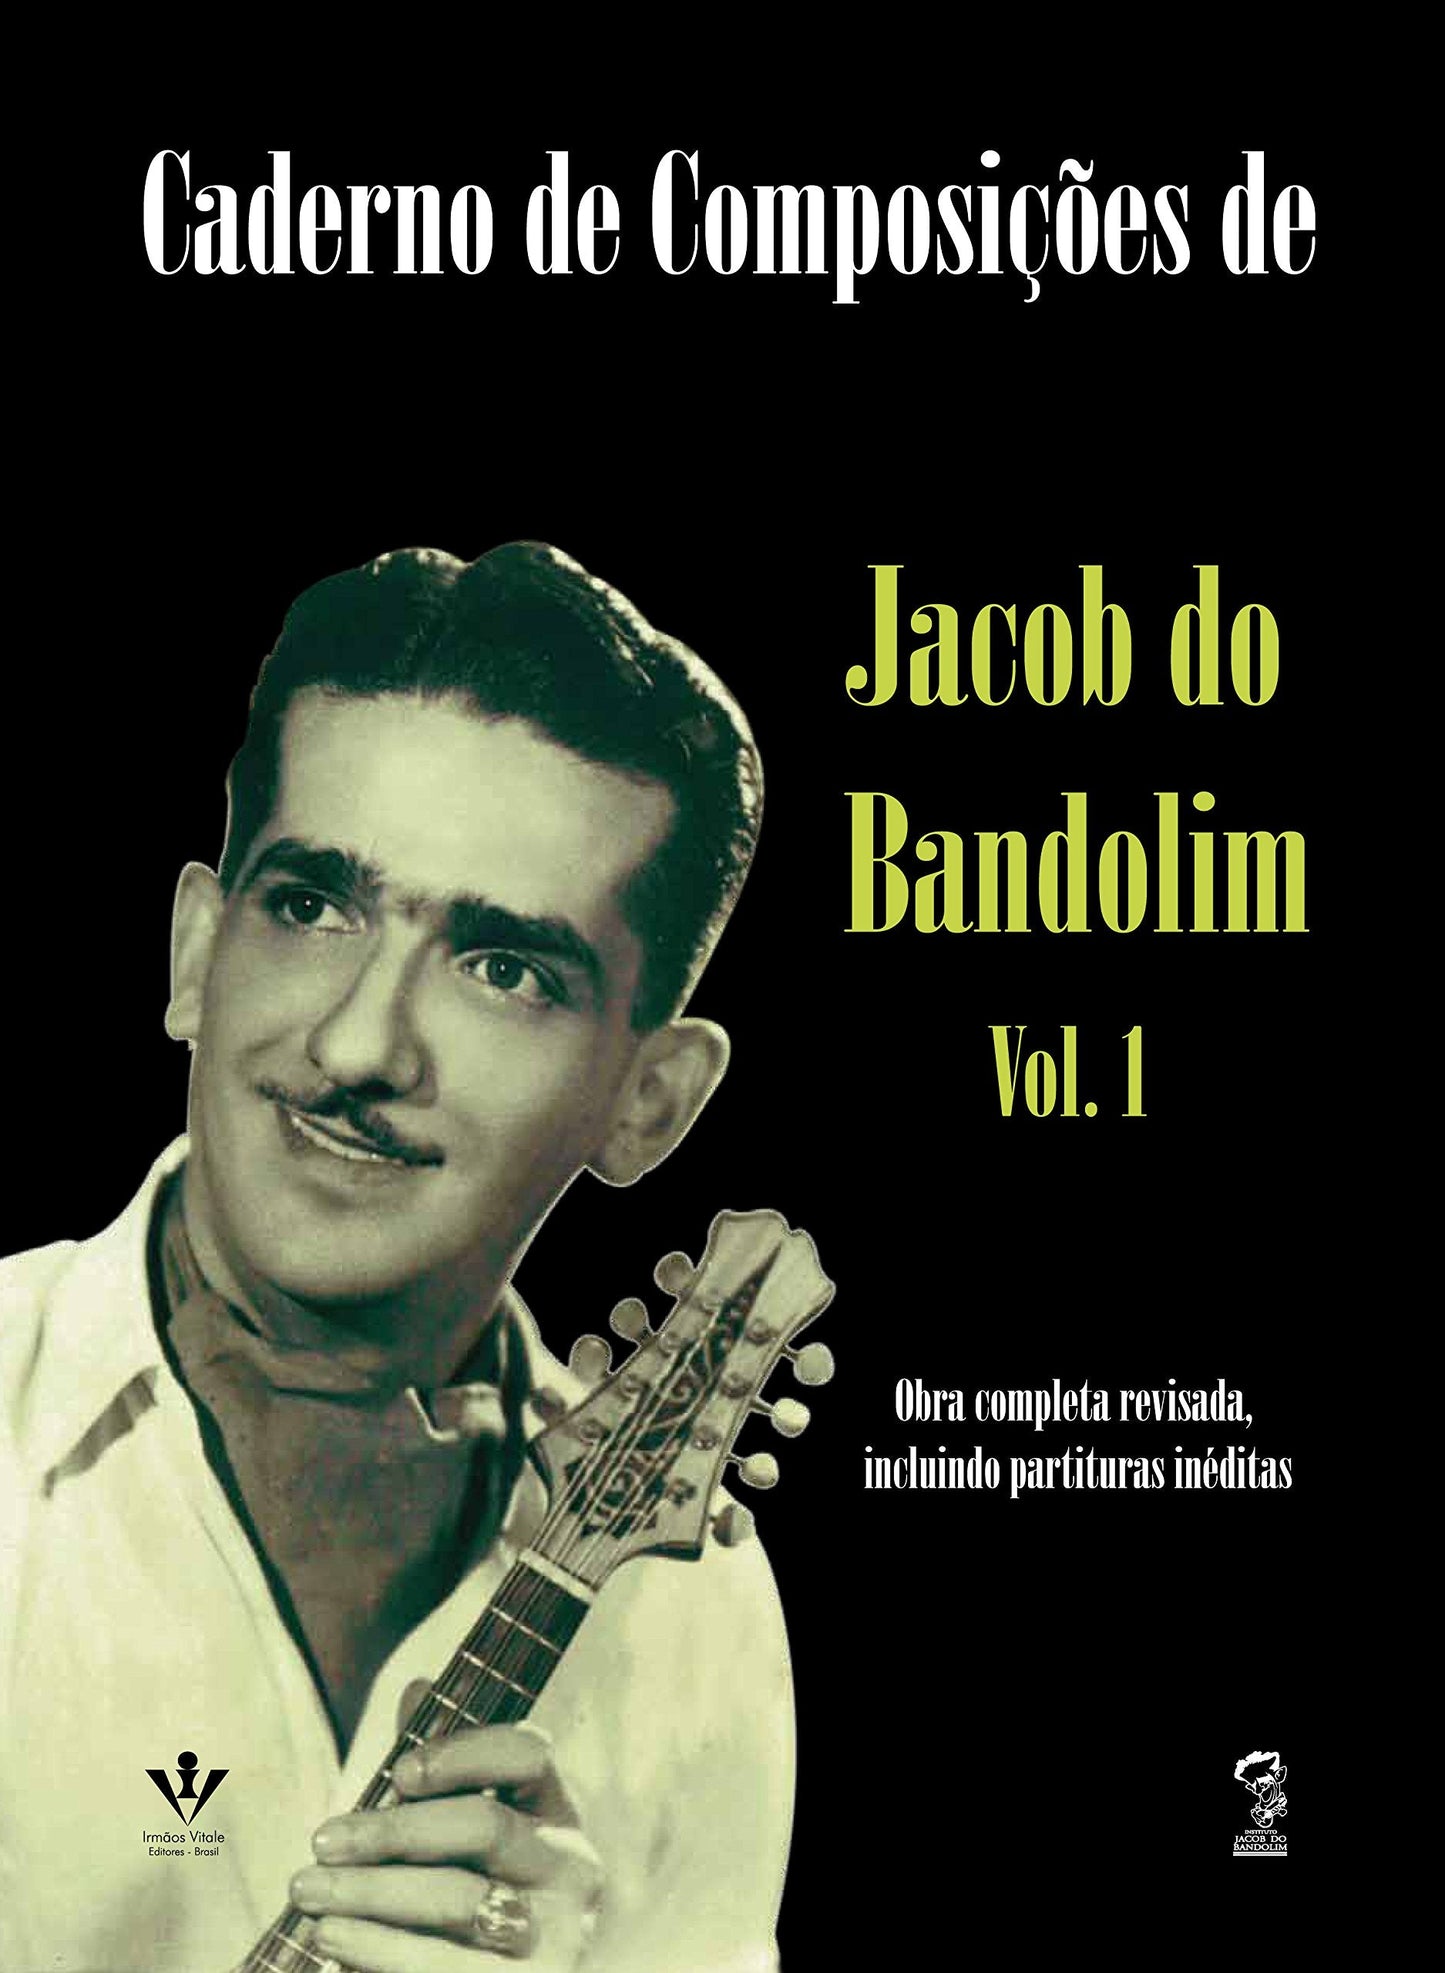 Collected Compositions of Jacob do Bandolim - Vol. 1